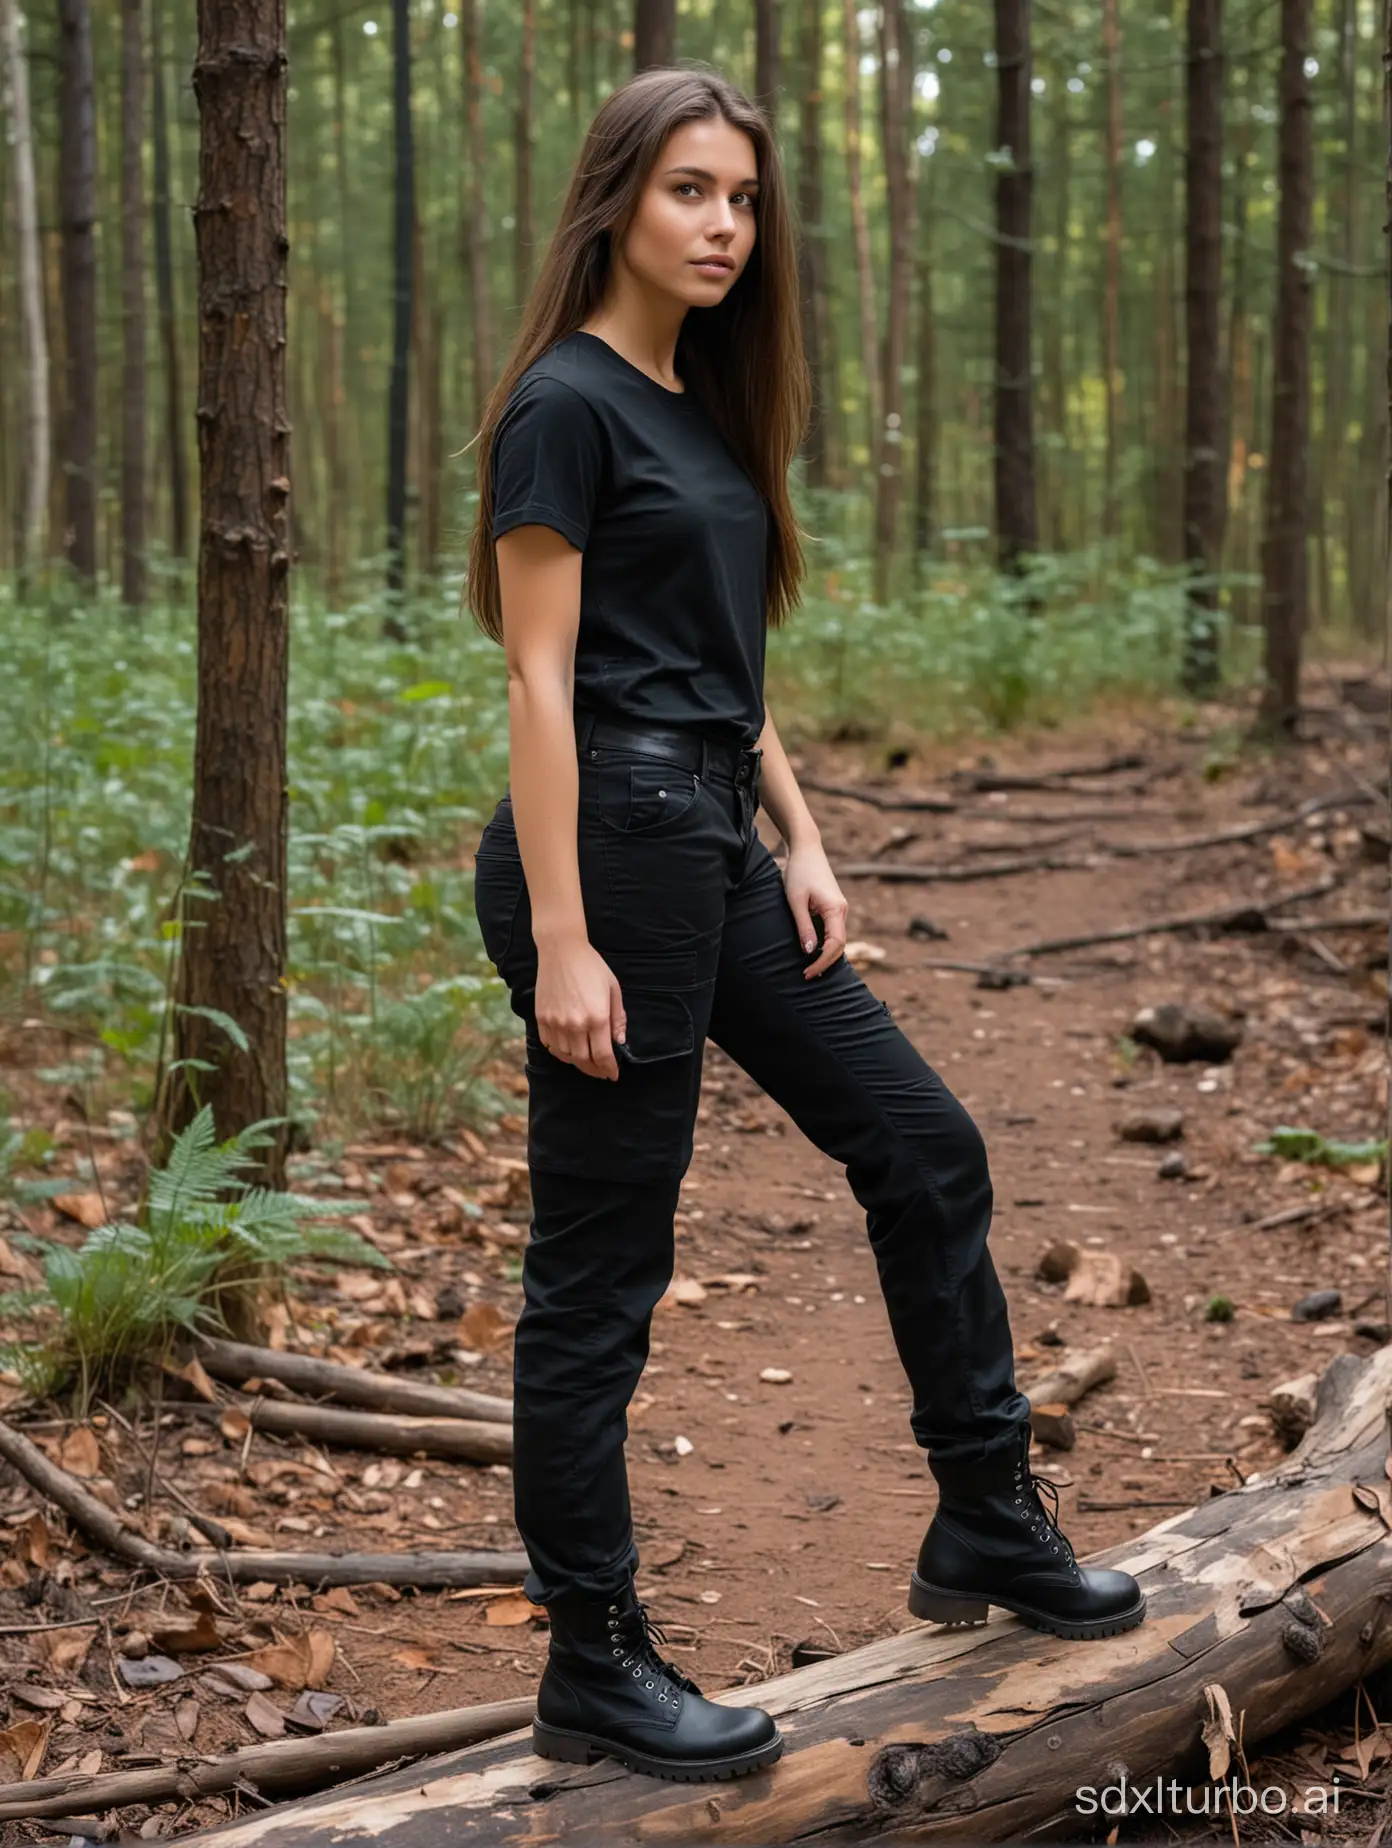 from side, Super delicate photograph, tall brunette polish girl, full body, (black tight cargo pants without pockets), the pants have a slight silky texture, (plain black t-shirt), long straight hair, walking, confident, elegant, slutty, safety boots, sitting on a log in the forest